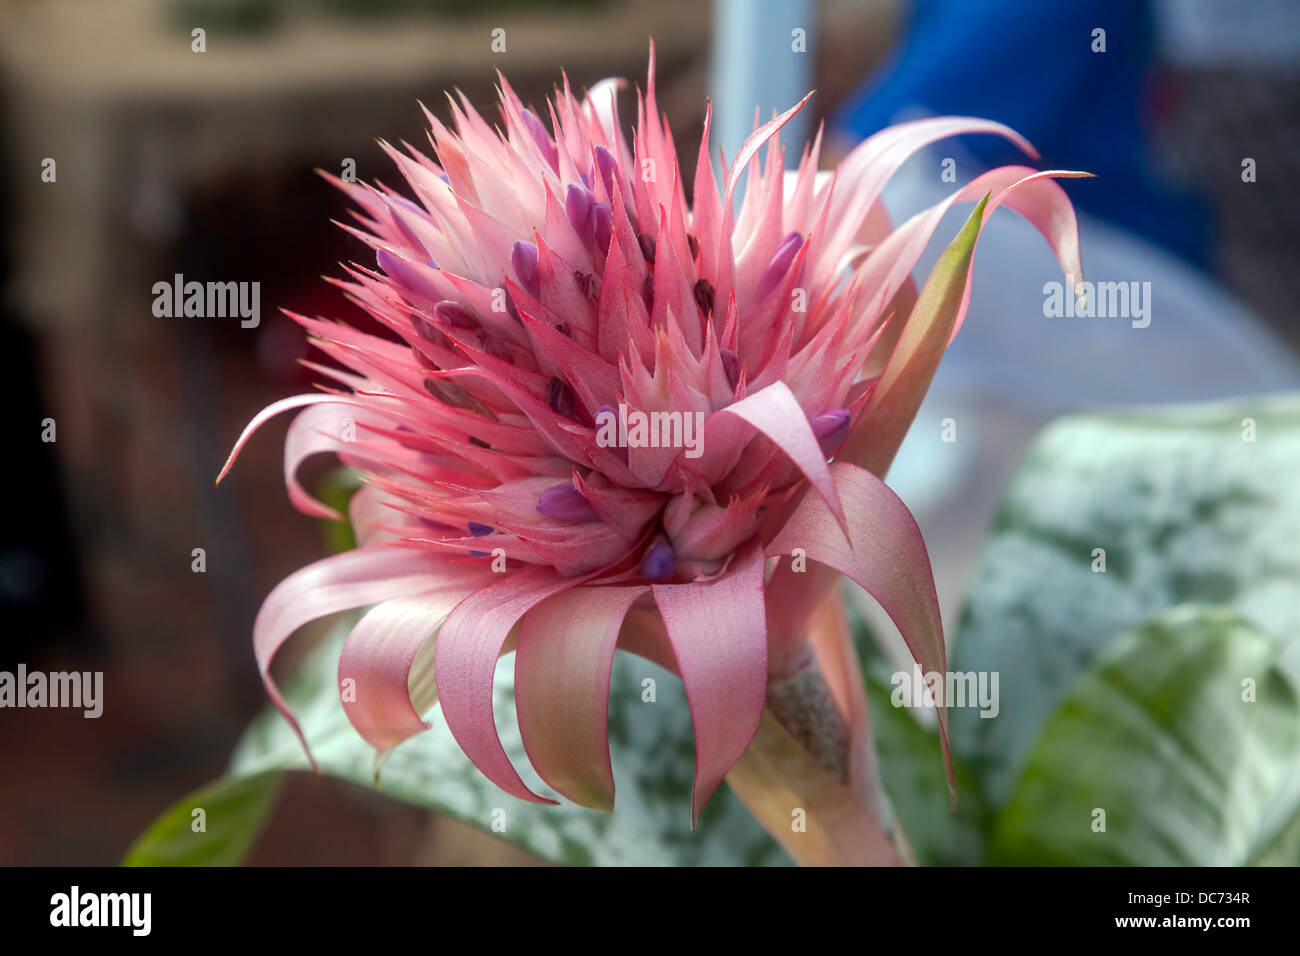 Pink Bromeliad Bloom with purple accents rises from variegated green leaves. Stock Photo